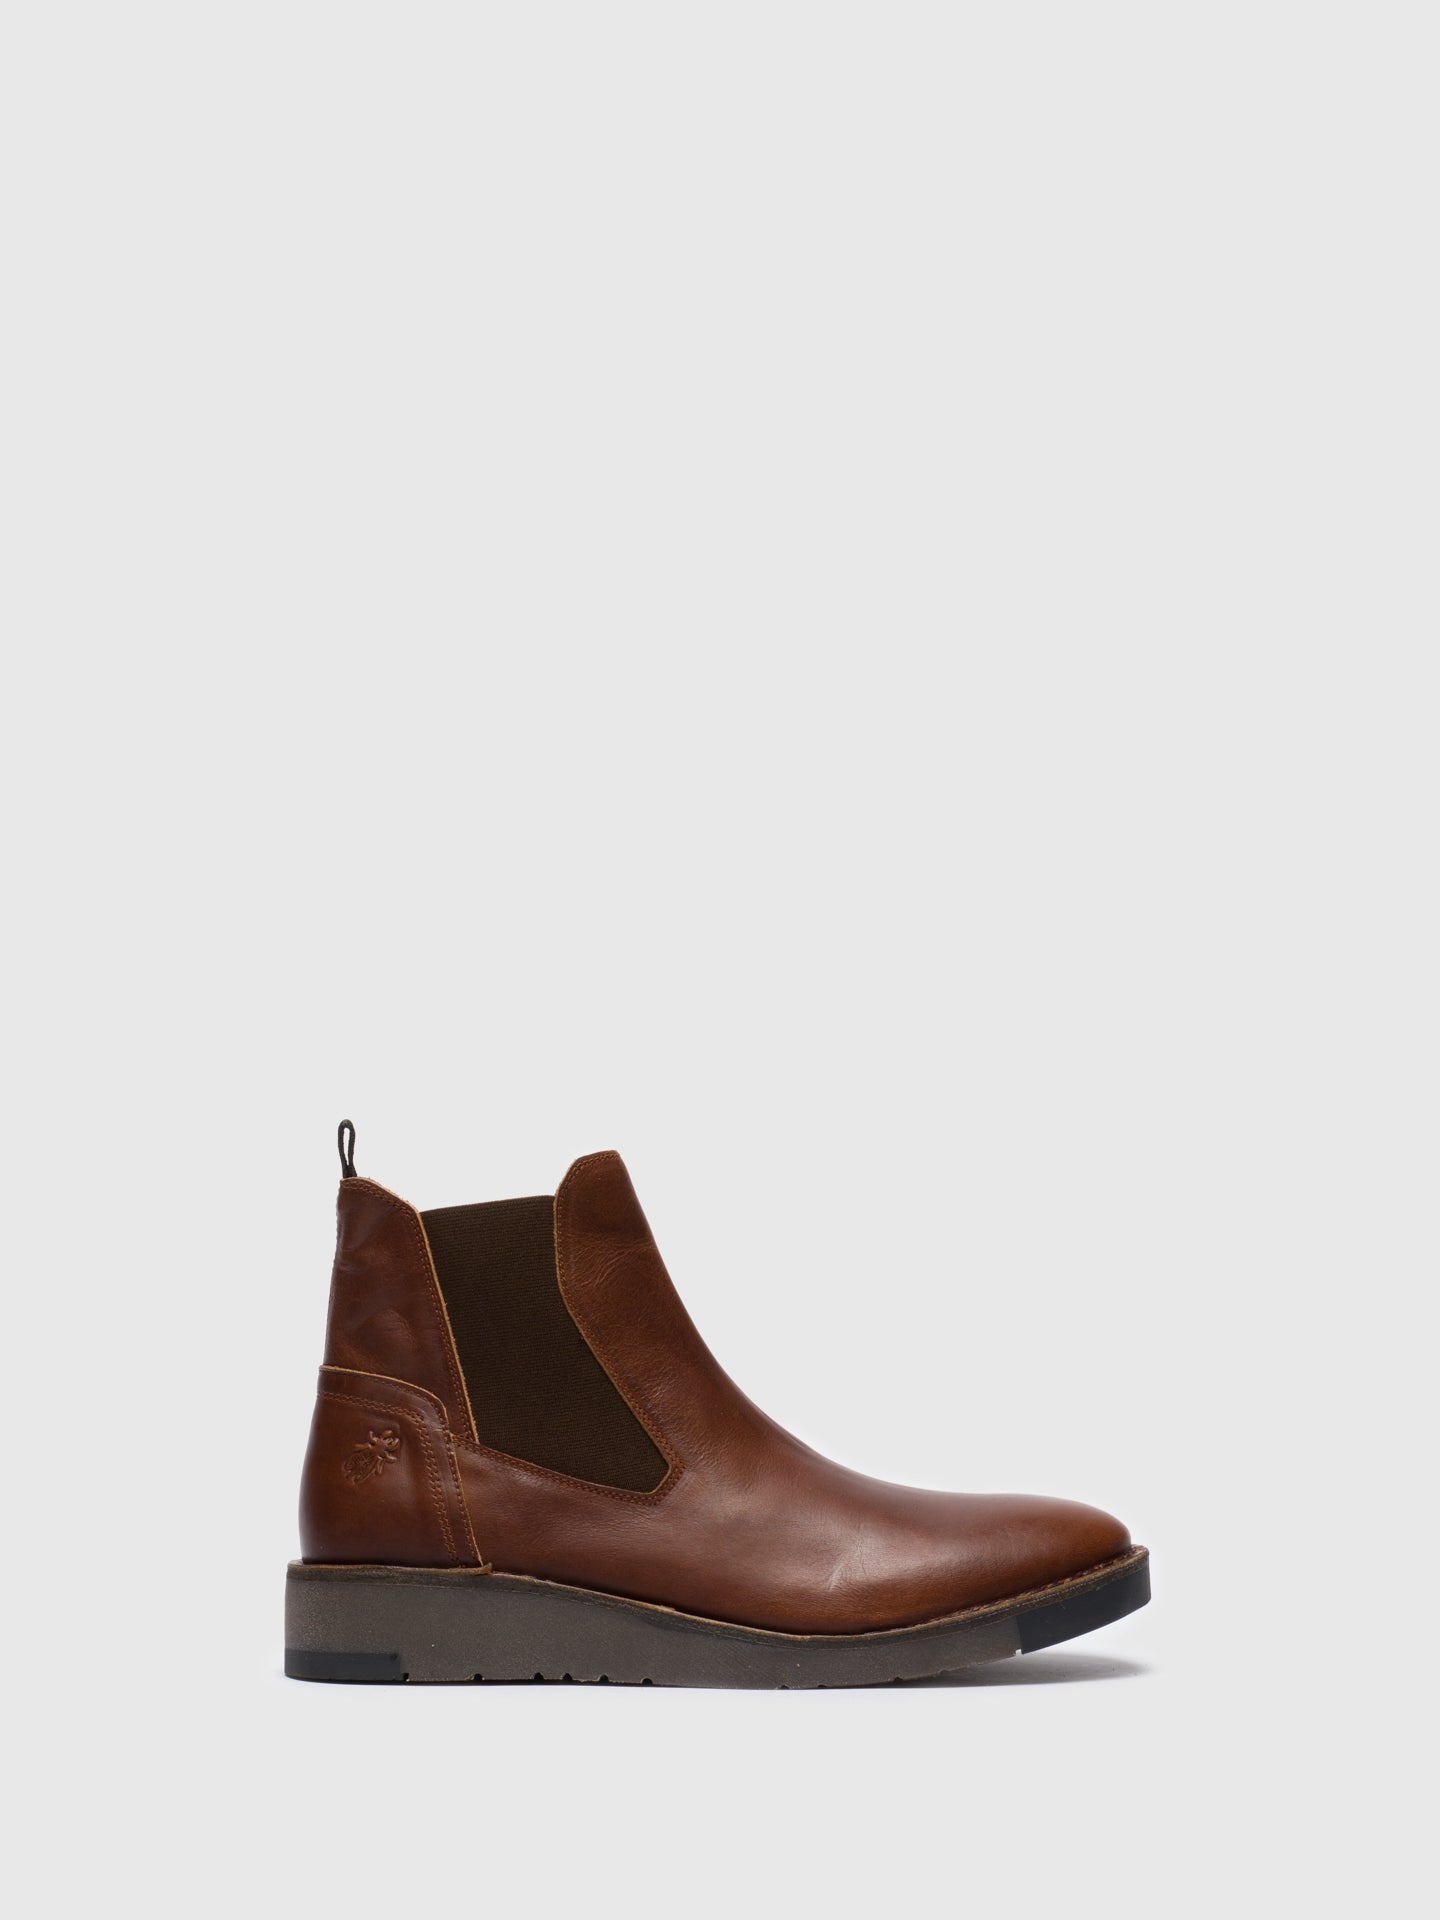 Fly London Chocolate Chelsea Ankle Boots